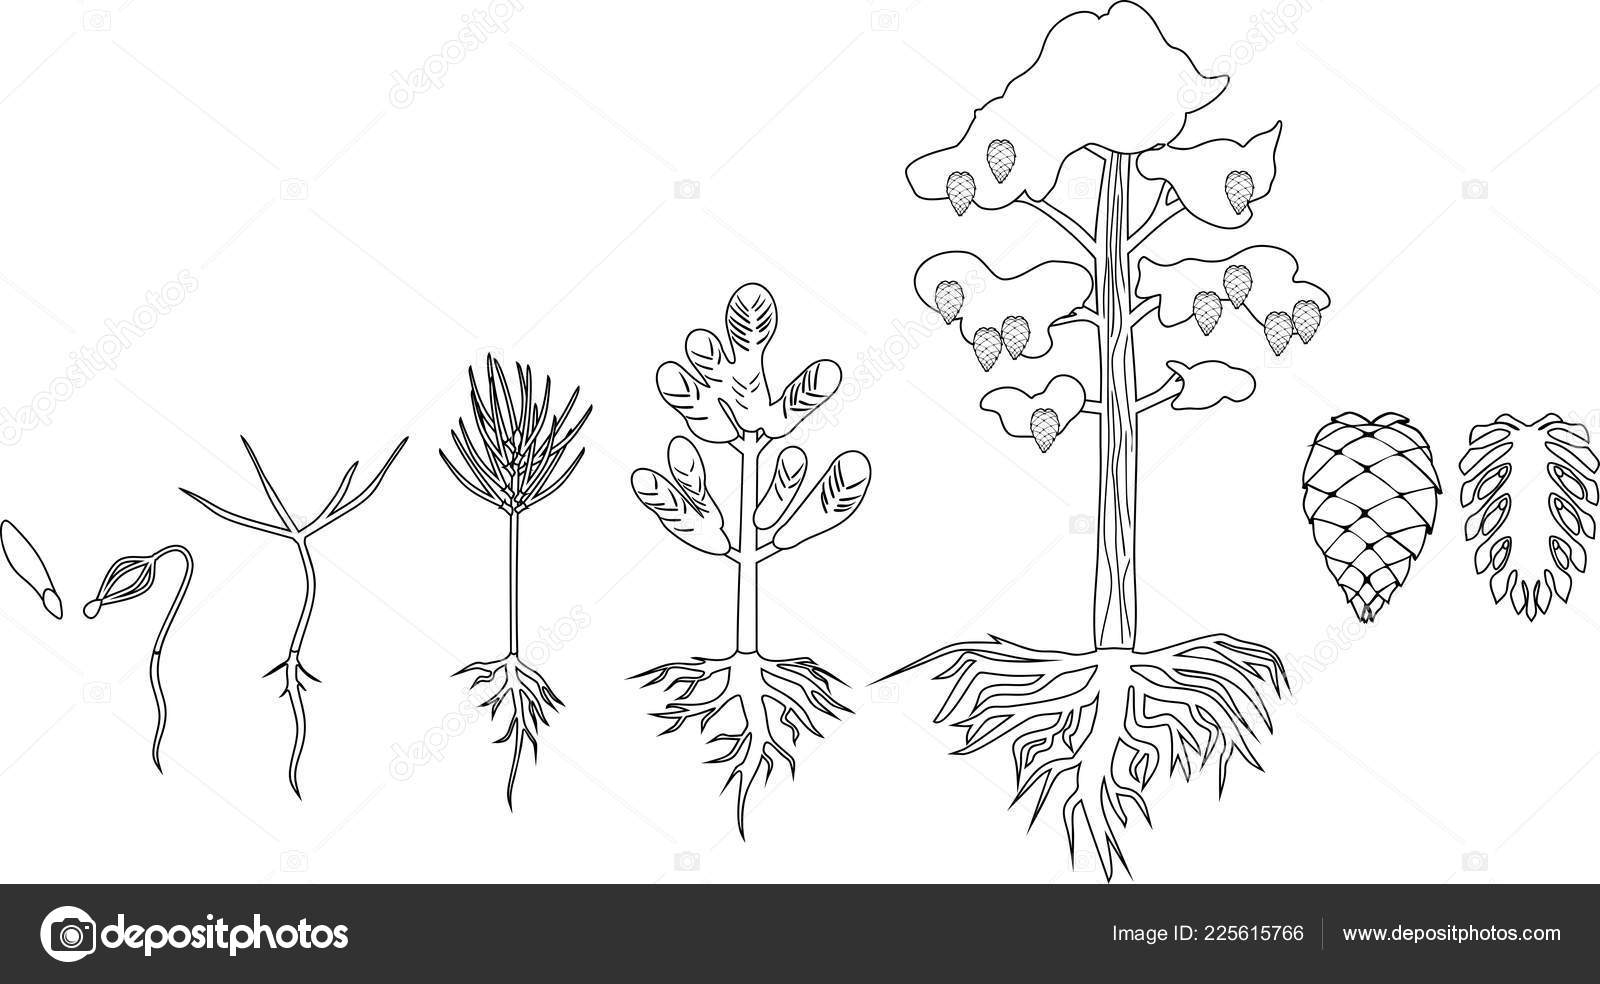 Coloring page pine tree life cycle stages growth seed mature stock vector by mariaflaya